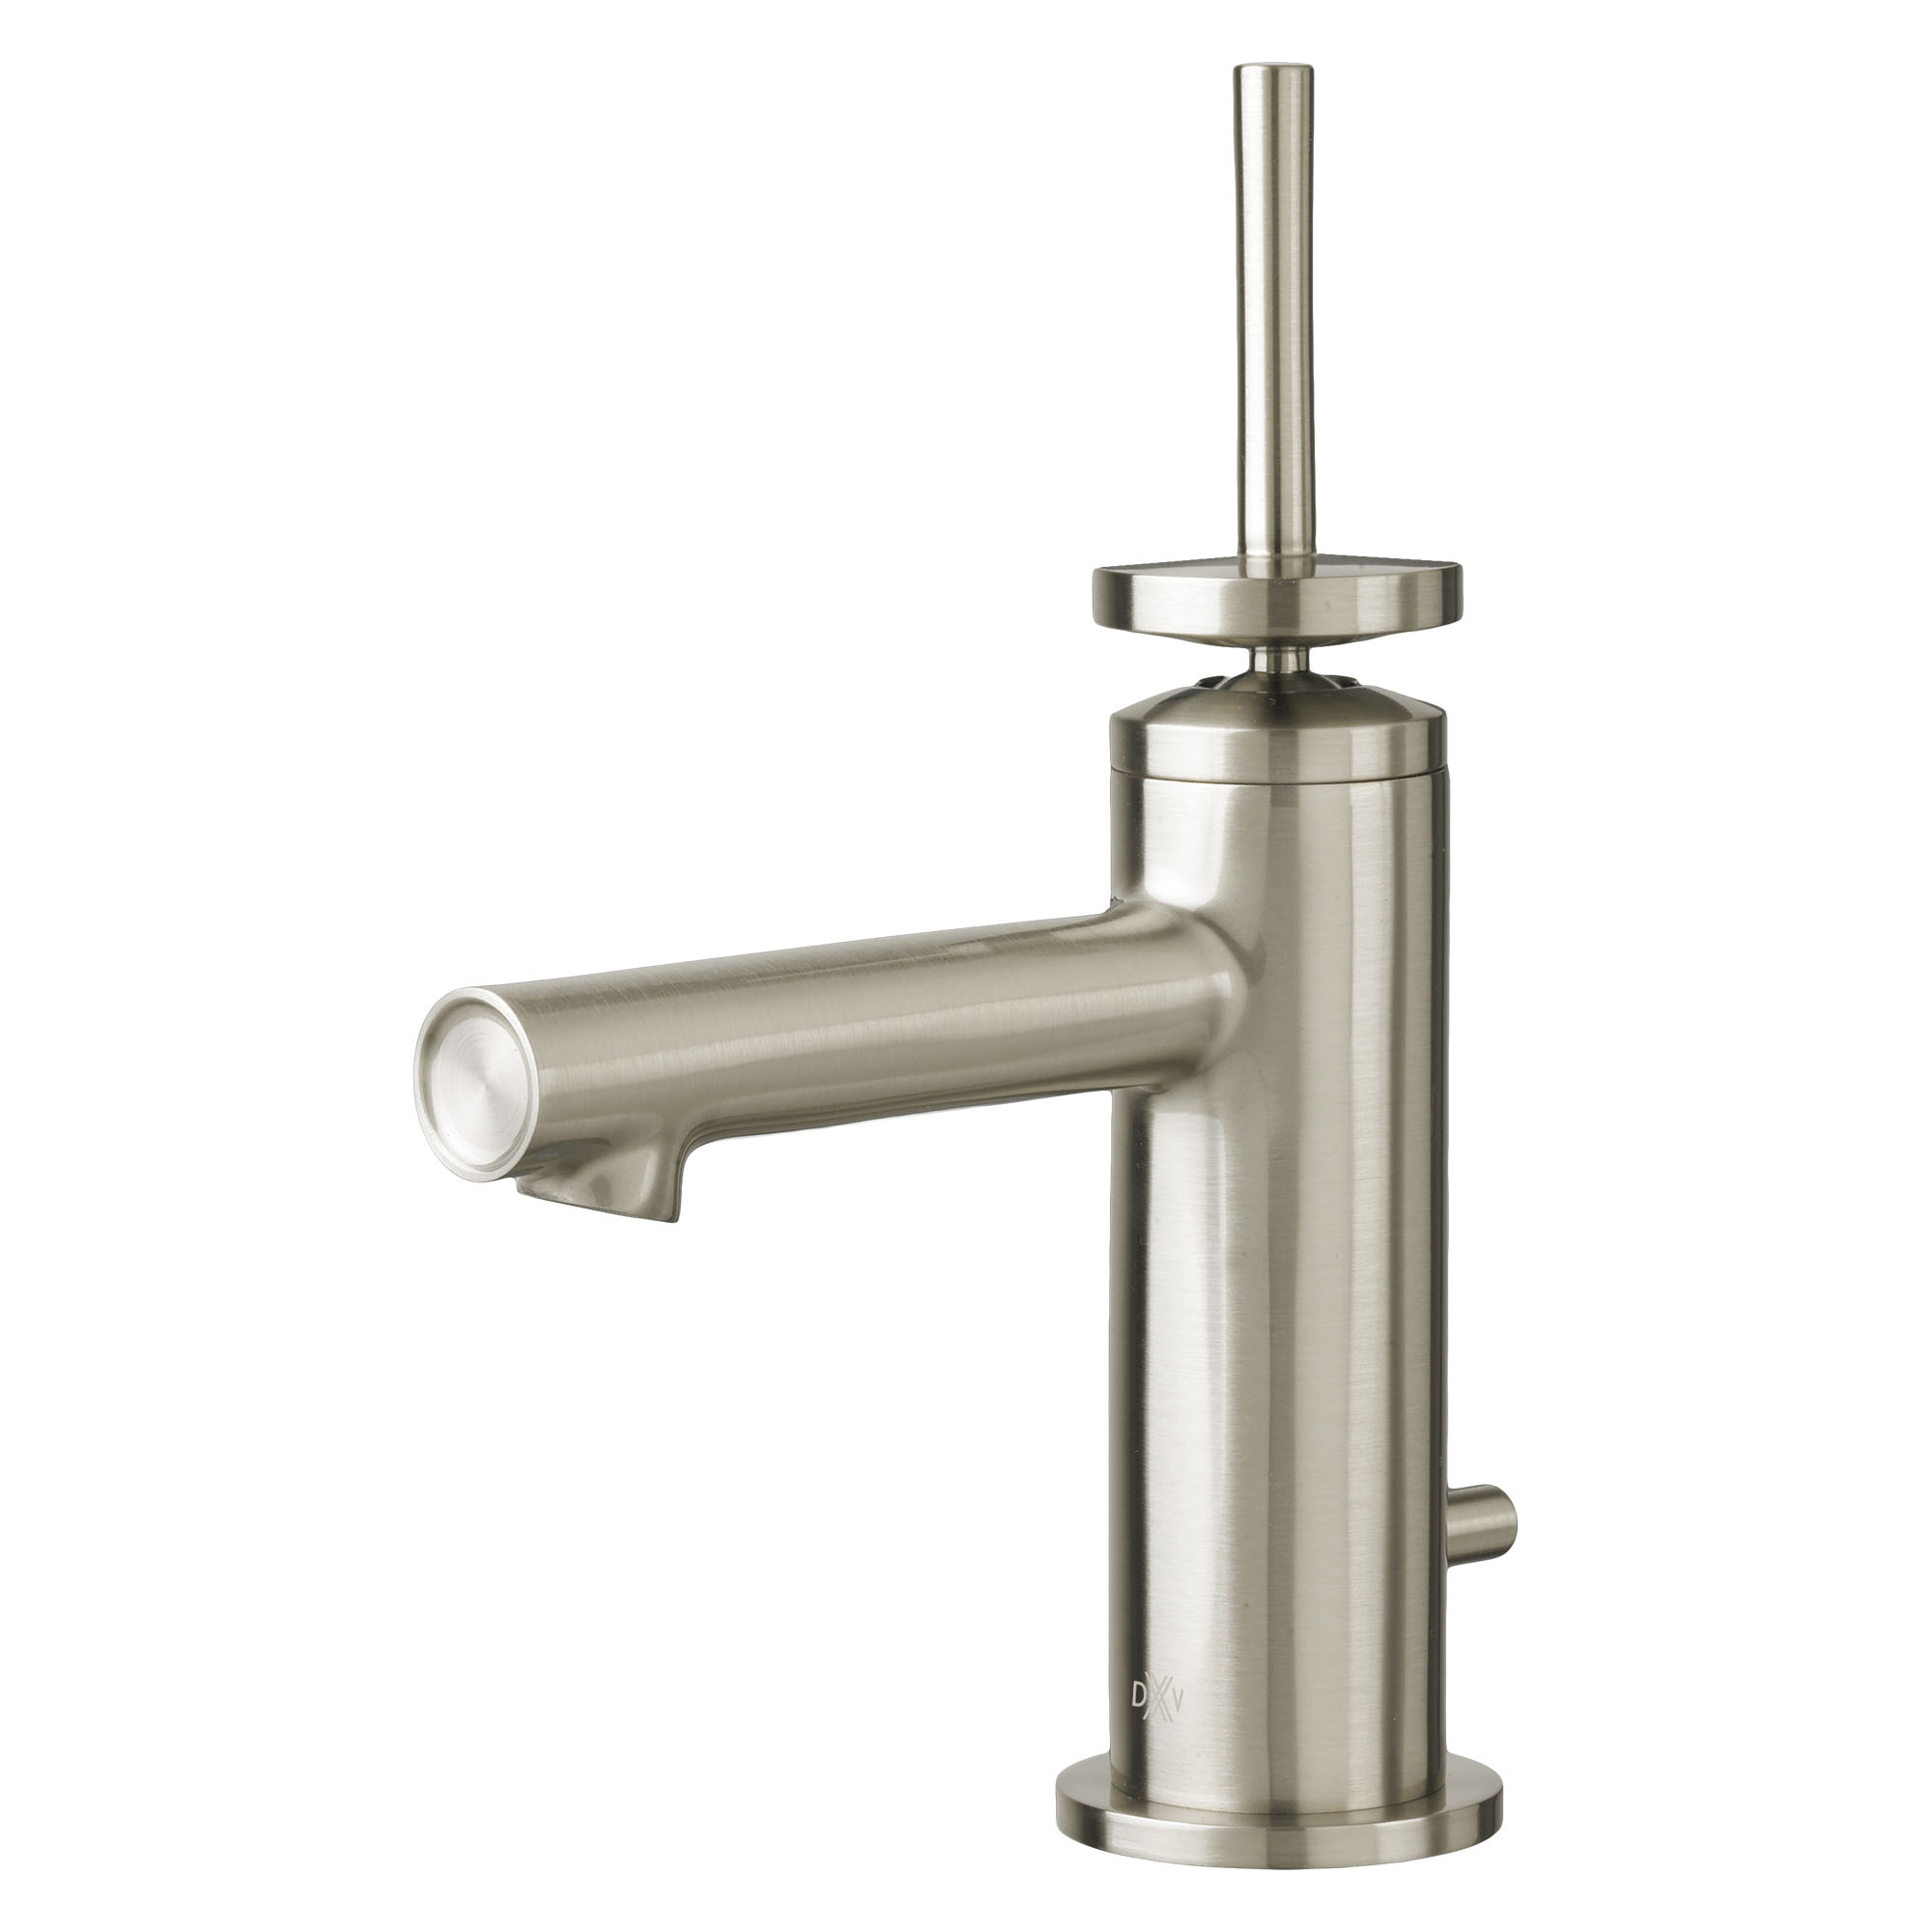 Percy Single Handle Bathroom Faucet with Stem Handle